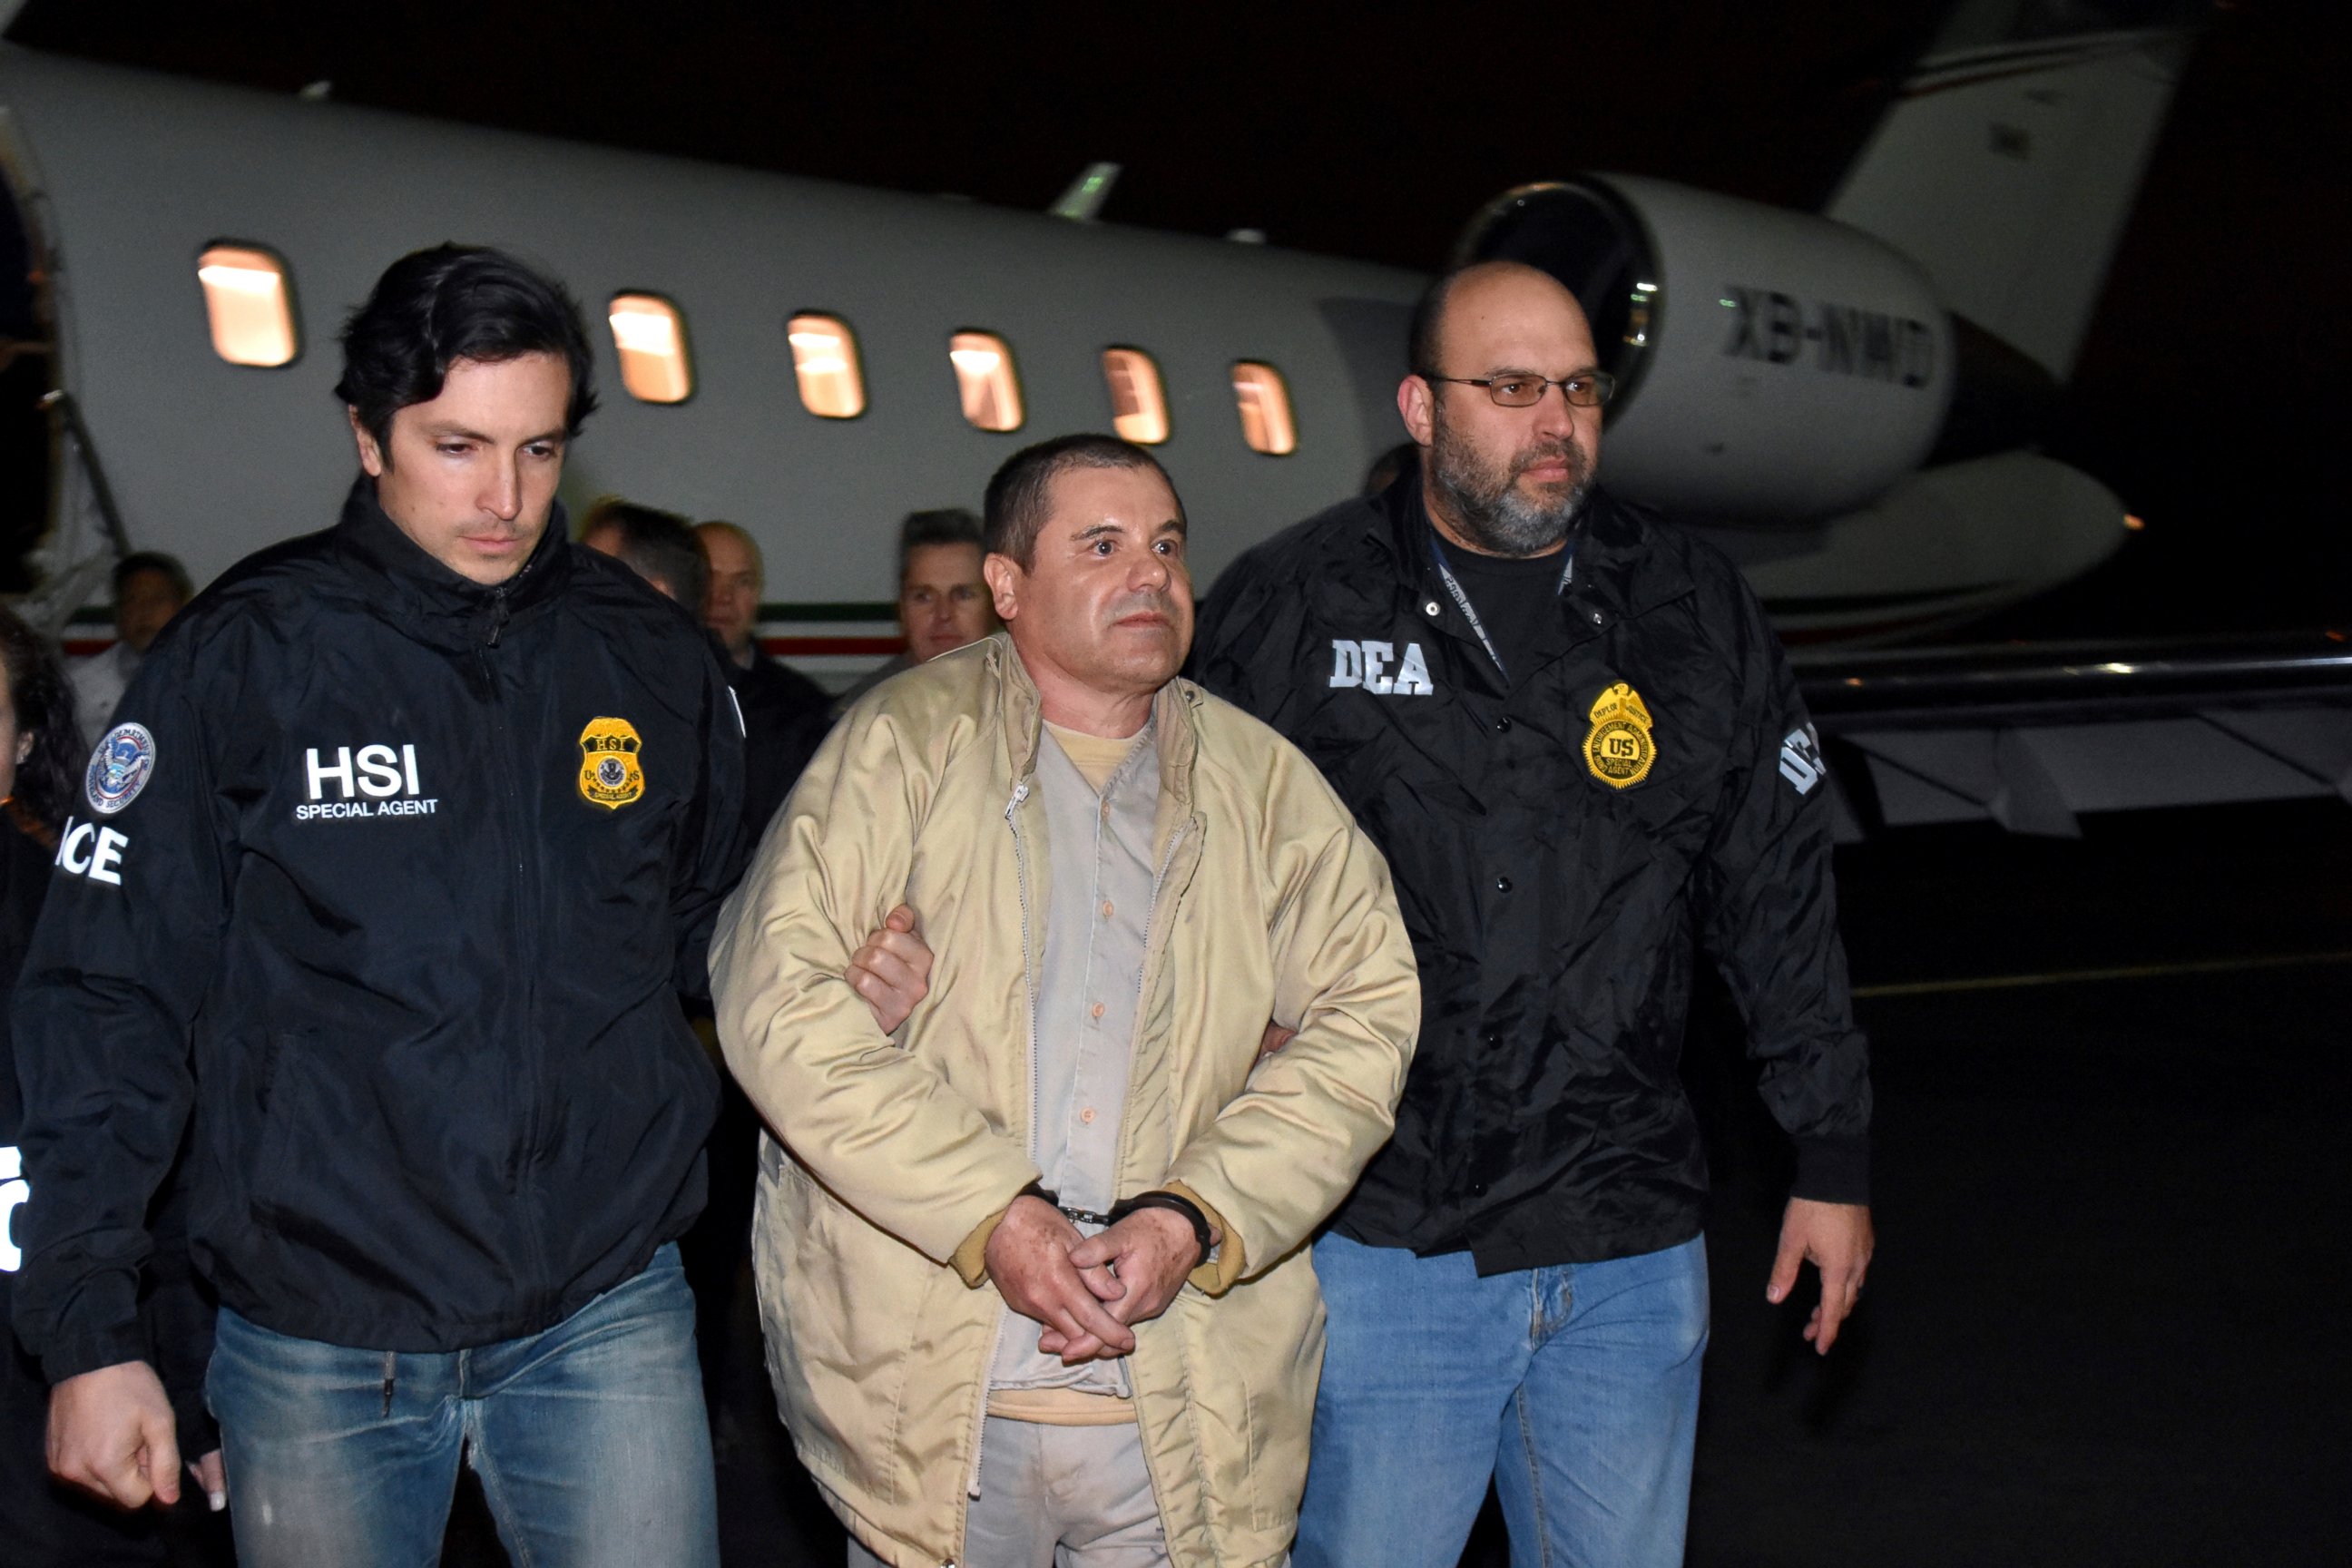 PHOTO: In this Jan. 19, 2017 file photo provided U.S. law enforcement, authorities escort Joaquin "El Chapo" Guzman, center, from a plane to a waiting caravan of SUVs at Long Island MacArthur Airport, in Ronkonkoma, N.Y.